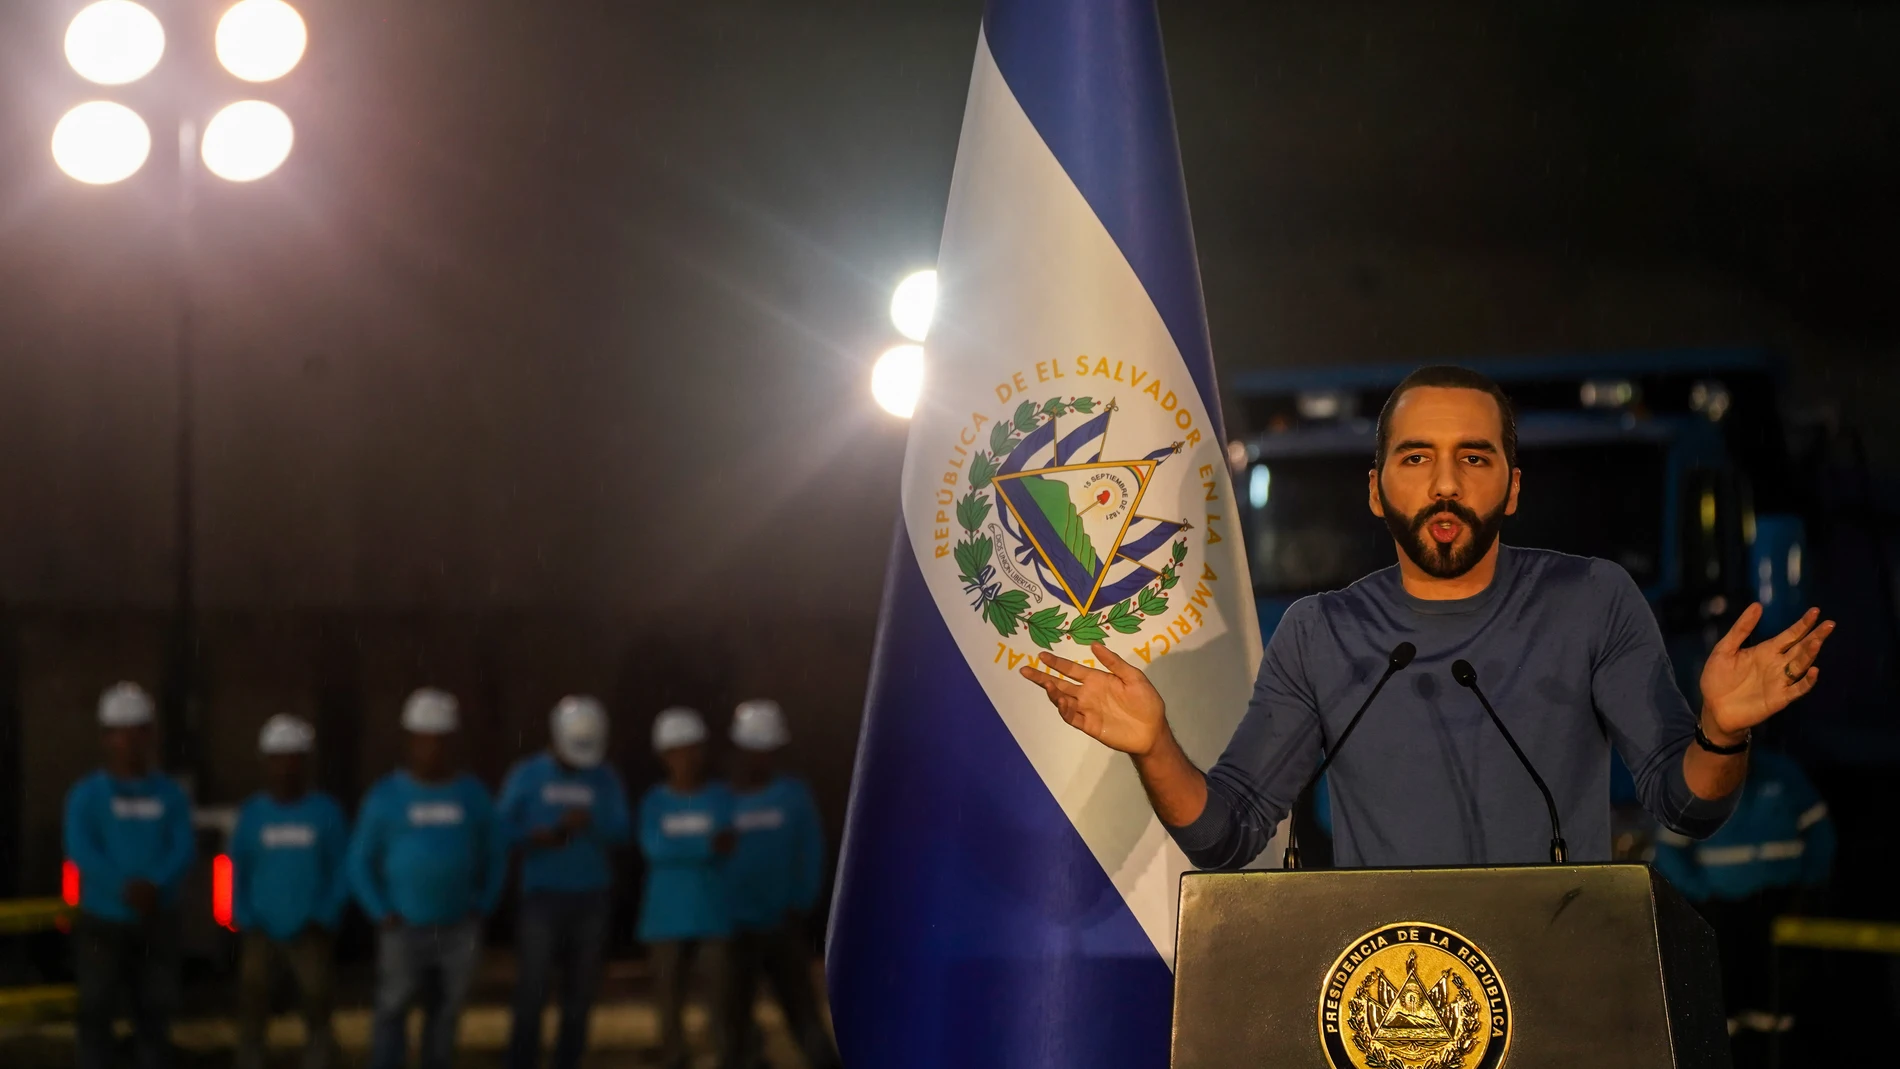 June 15, 2023, San Salvador, El Salvador: Salvadoran President Nayib Bukele gestures while speaking during a public appearance to set the first stone for the new Rosales Hospital in the Salvadoran capital. (Foto de ARCHIVO) 15/06/2023